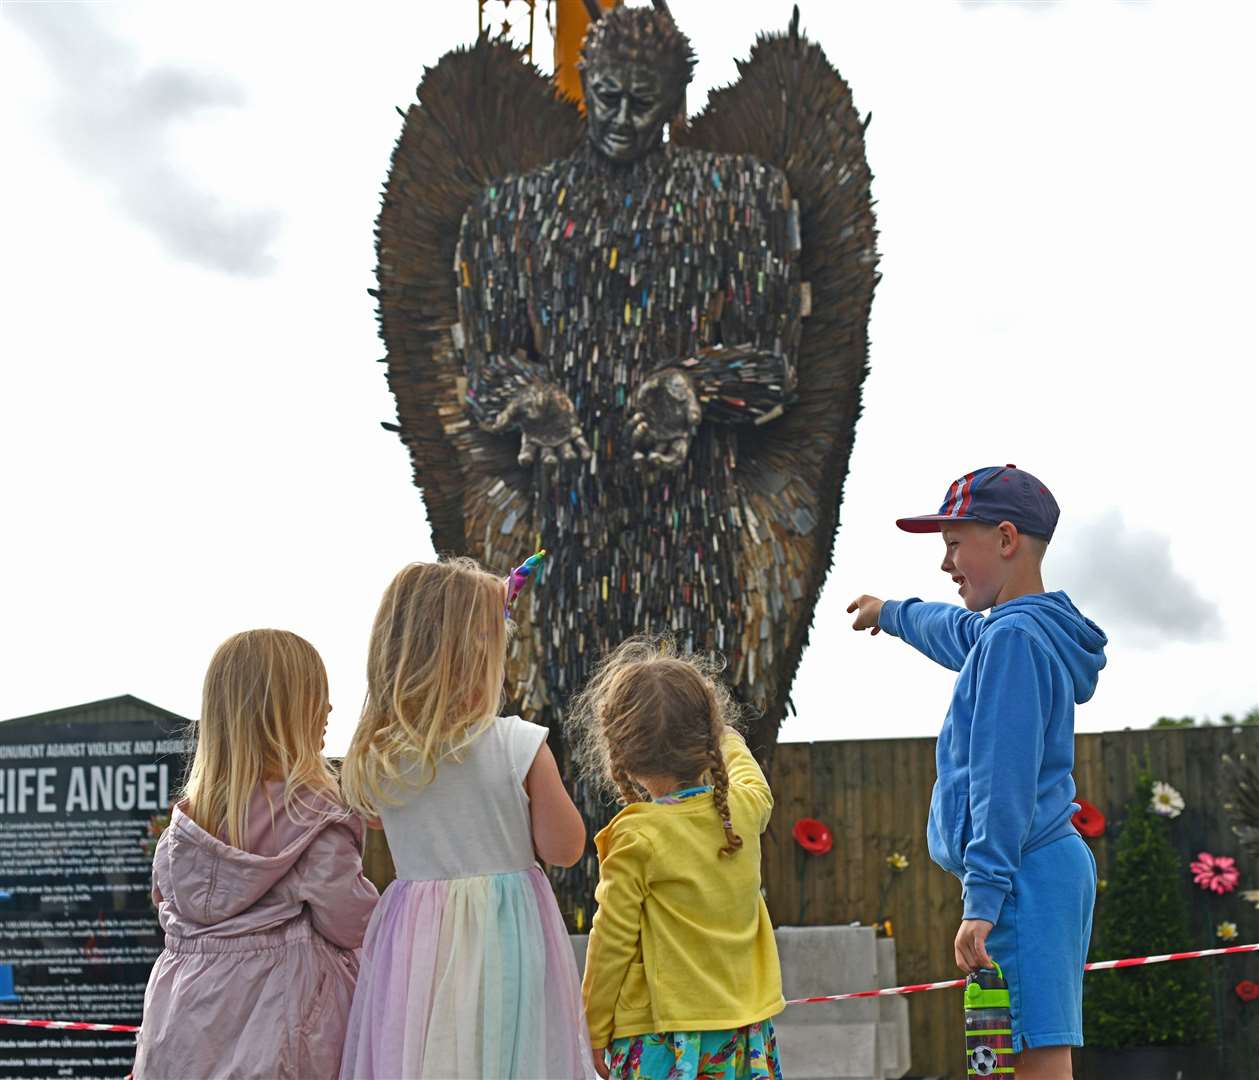 The Knife Angel will be displayed at the Lighthouse Church in Maidstone. Picture: OneMaidstone